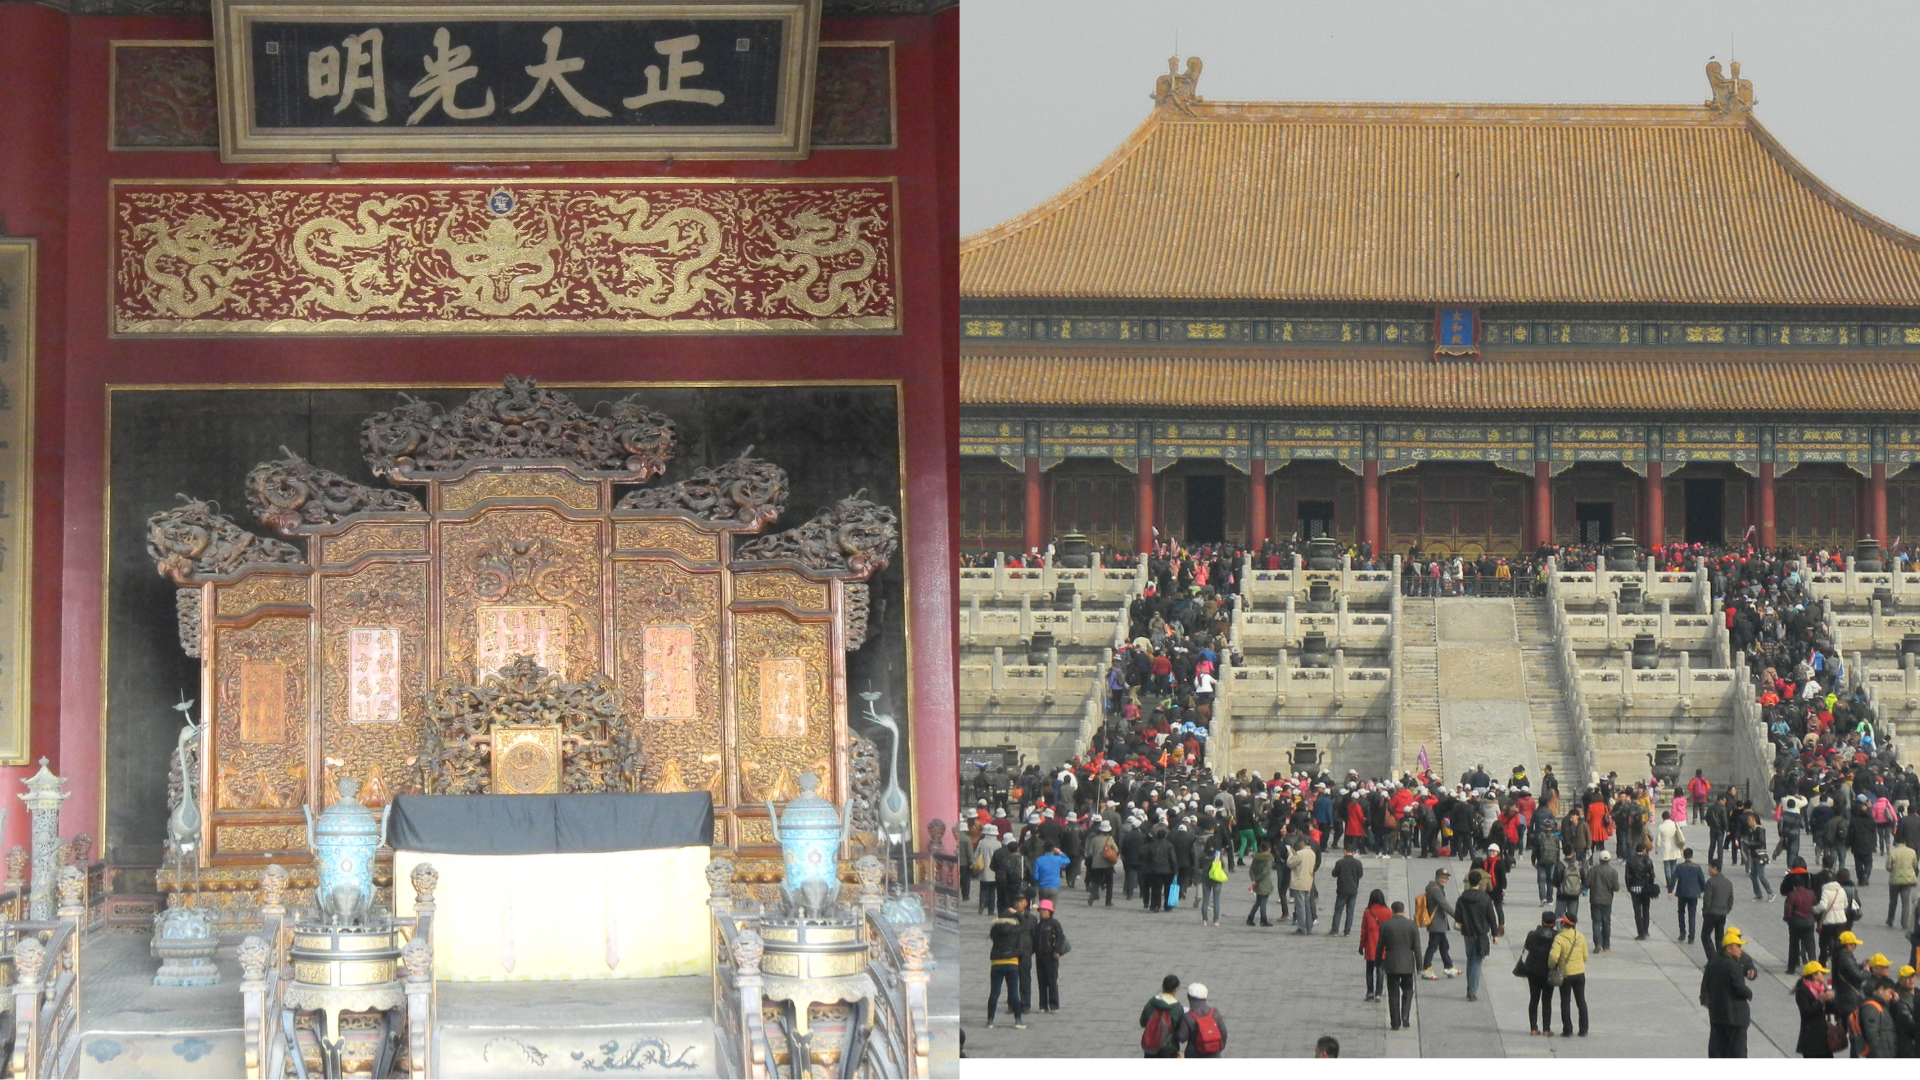 Image of a building with Chinese architecture and a golden throne within the Forbidden City